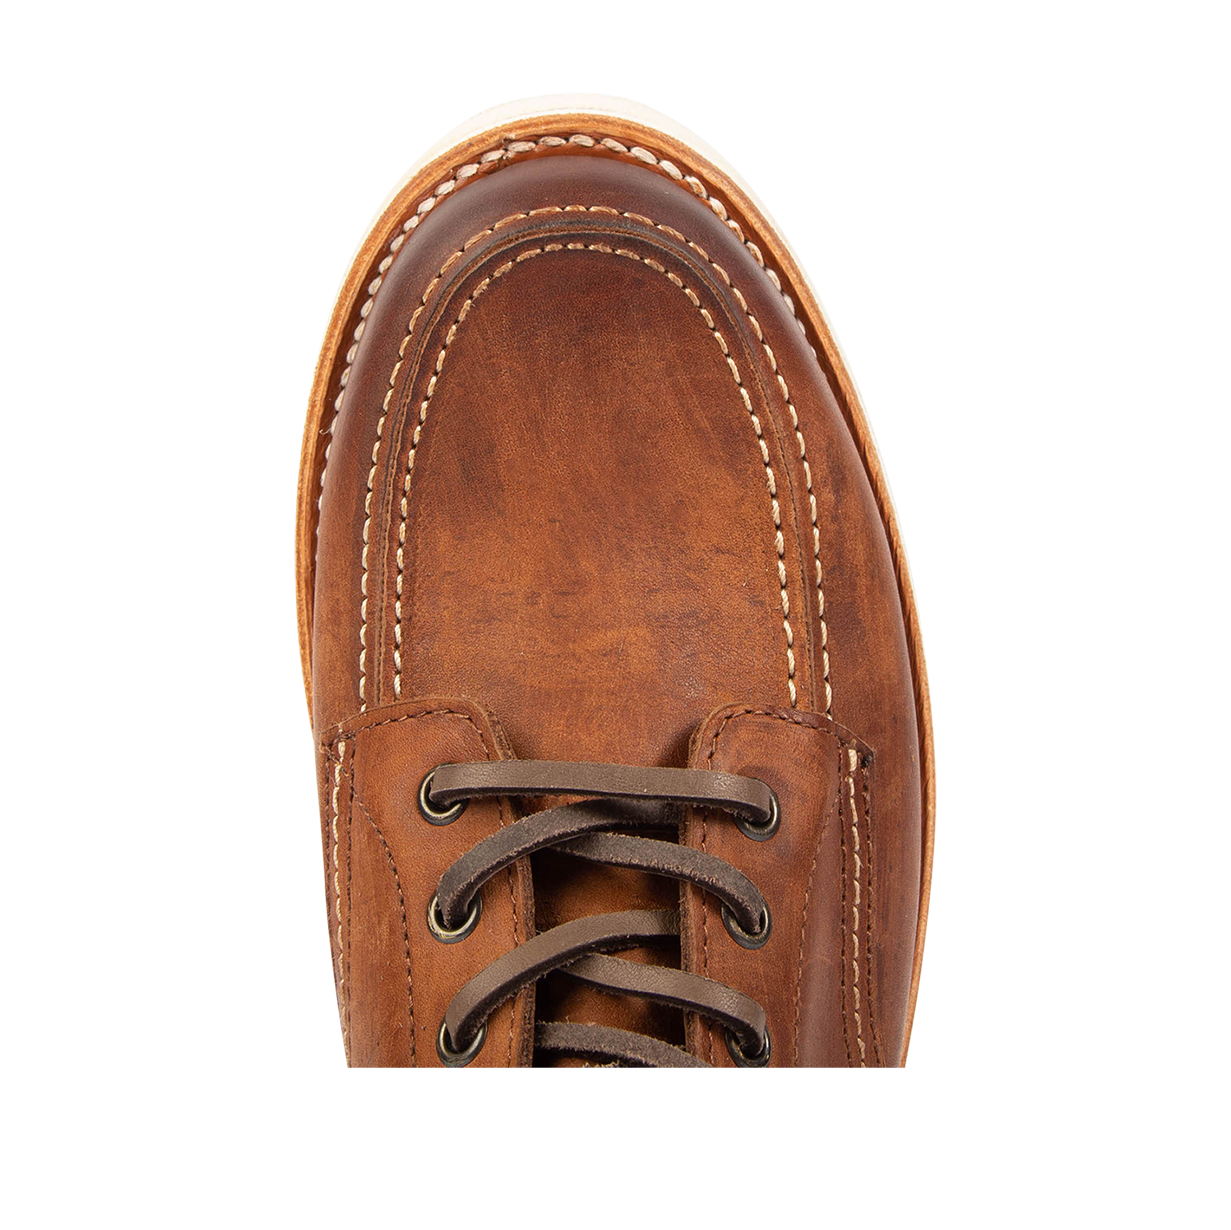 Top view showing round toe and leather lacing on FREEBIRD men's Carbon cognac shoe